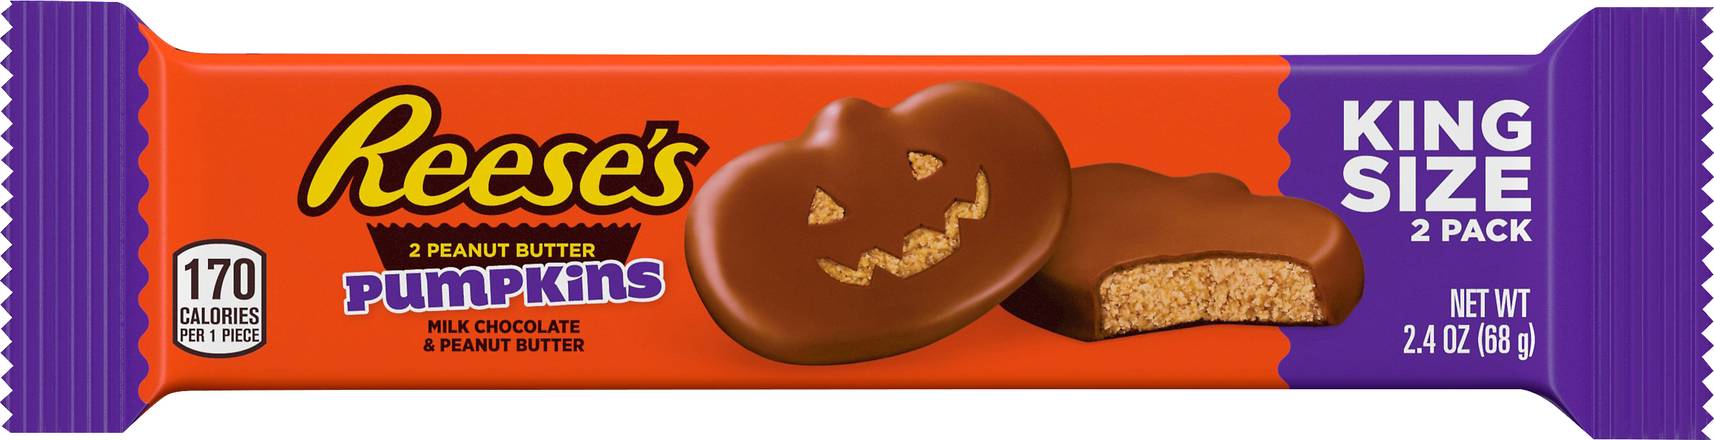 Reese's King Size Peanut Butter Pumpkins Candy (2 ct)